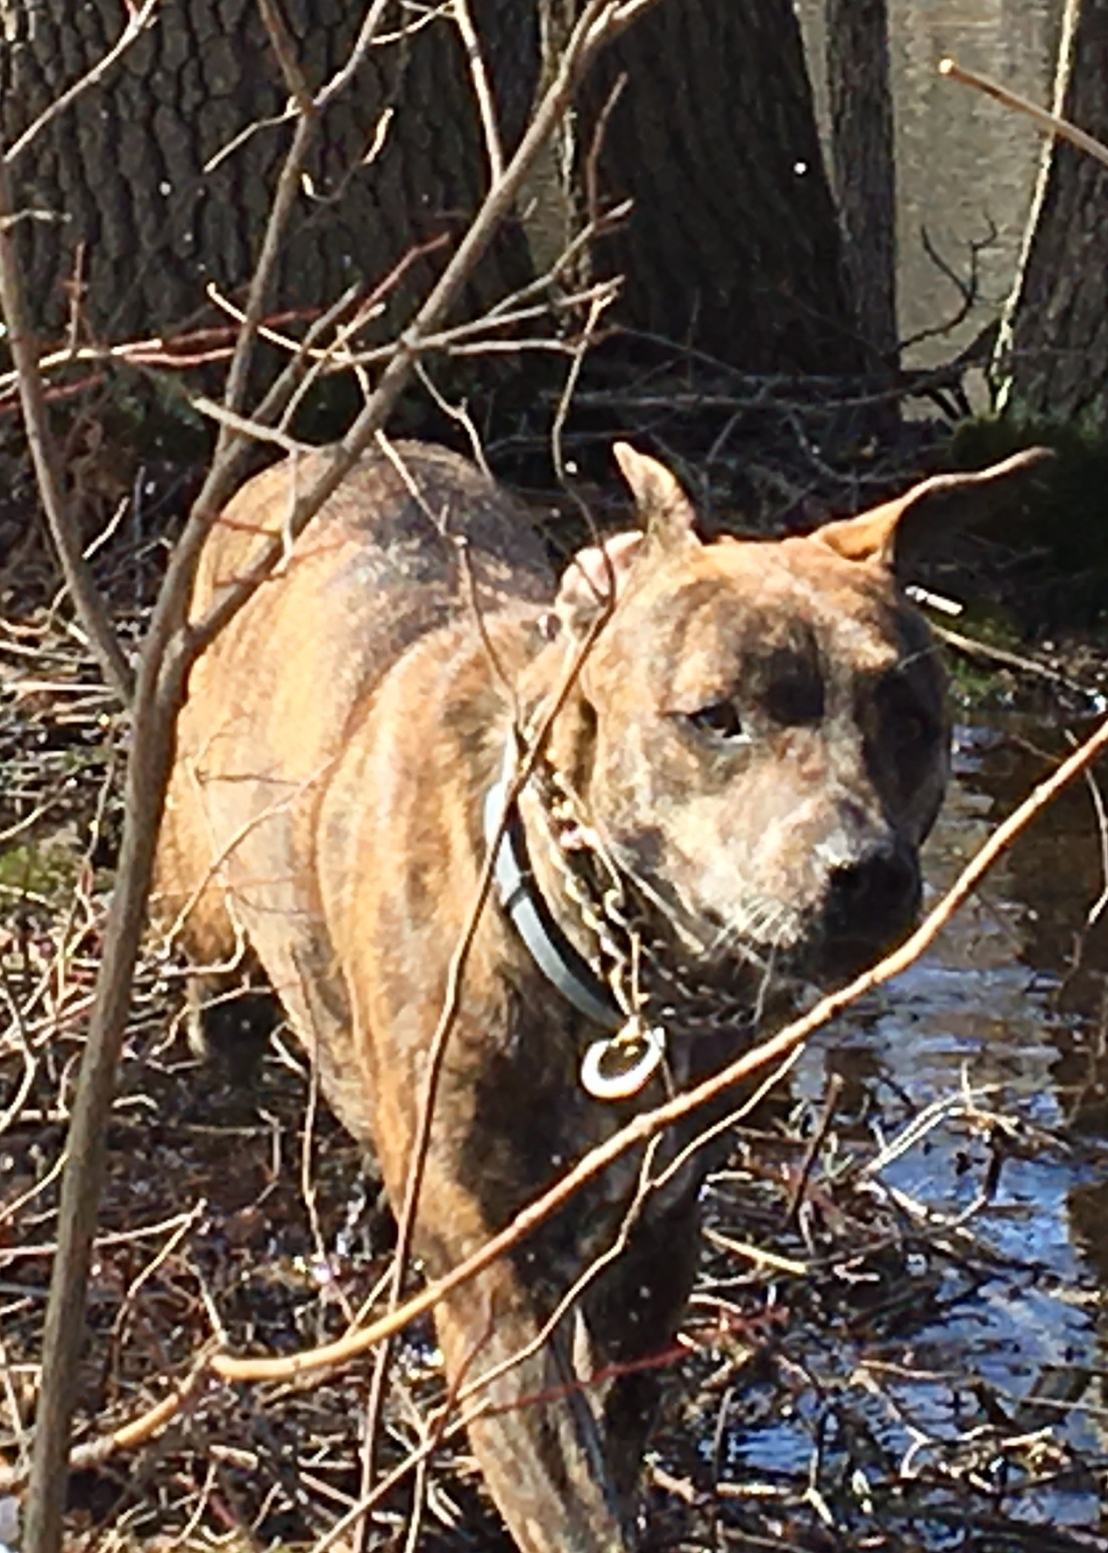 Bella walks along the cold water's edge of Ponkapoag Pond